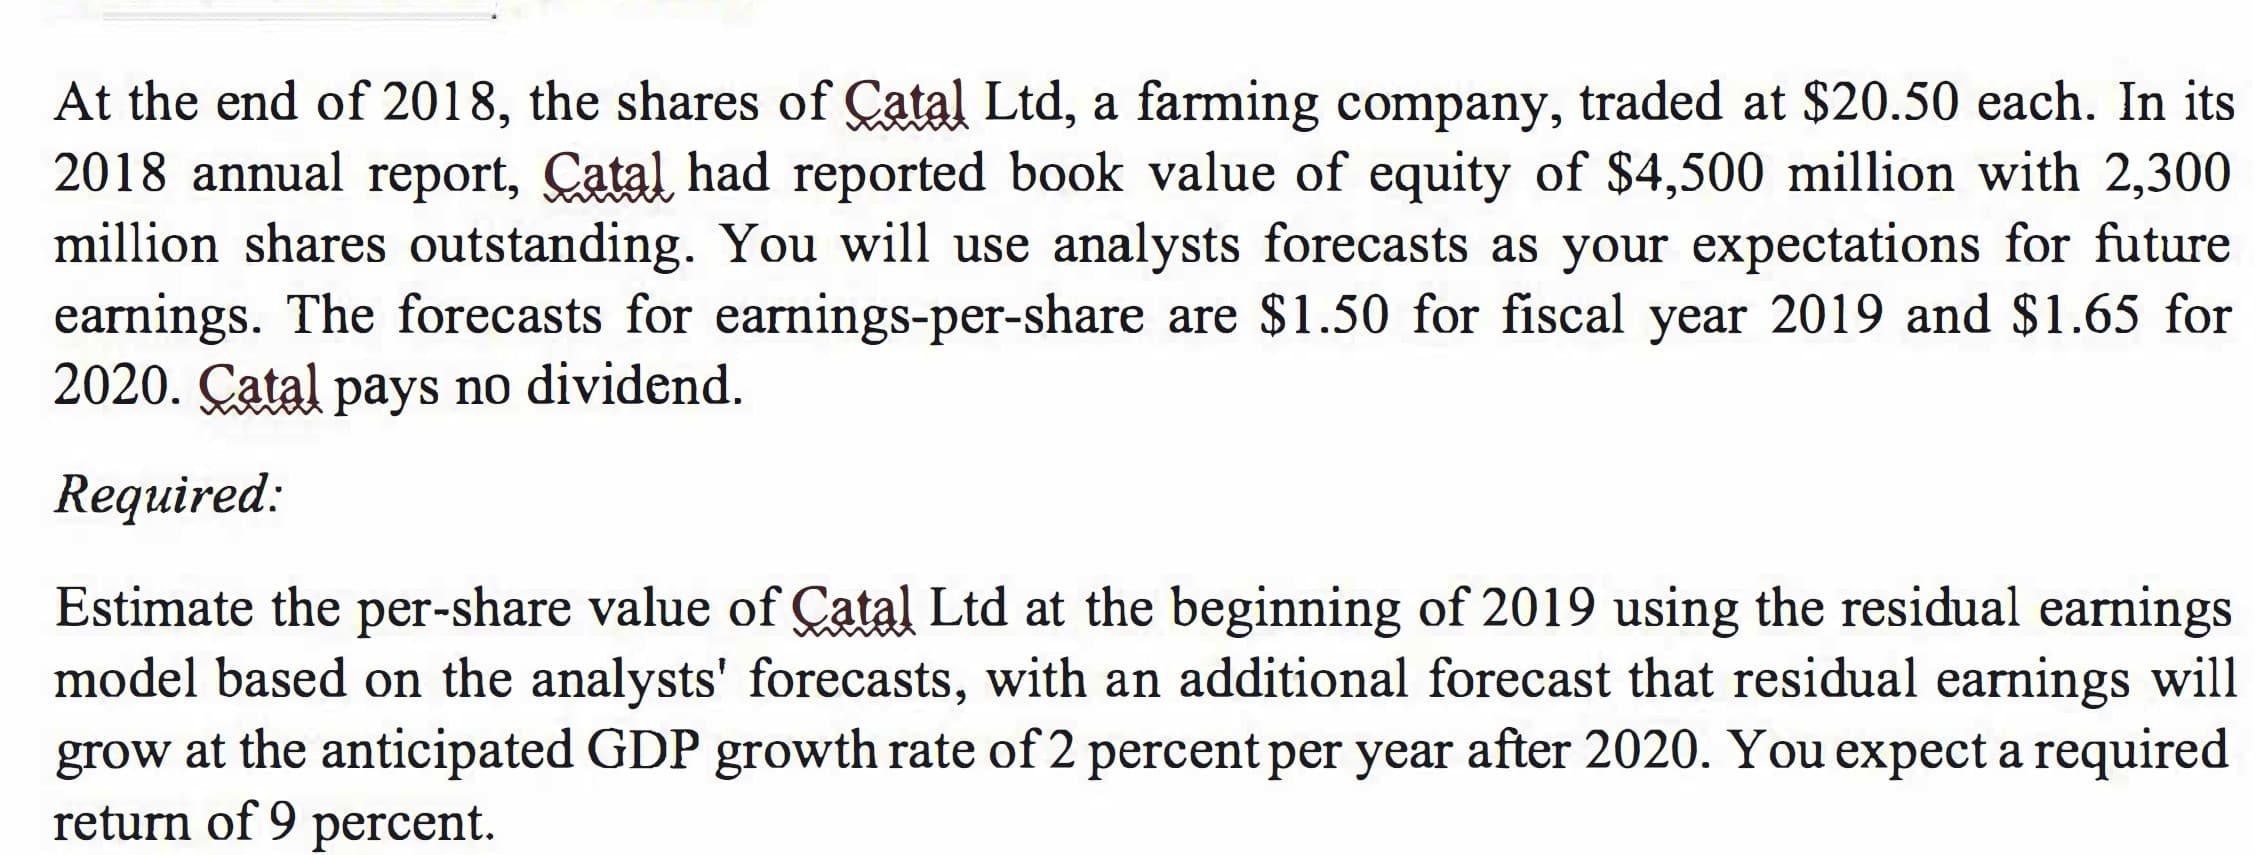 At the end of 2018, the shares of Çatal Ltd, a farming company, traded at $20.50 each. In its
2018 annual report, Catal had reported book value of equity of $4,500 million with 2,300
million shares outstanding. You will use analysts forecasts as your expectations for future
earnings. The forecasts for earnings-per-share are $1.50 for fiscal year 2019 and $1.65 for
2020. Çatal pays no dividend.
Required:
Estimate the per-share value of Çatal Ltd at the beginning of 2019 using the residual earnings
model based on the analysts' forecasts, with an additional forecast that residual earnings will
grow at the anticipated GDP growth rate of 2 percent per year after 2020. You expect a required
return of 9 percent.
